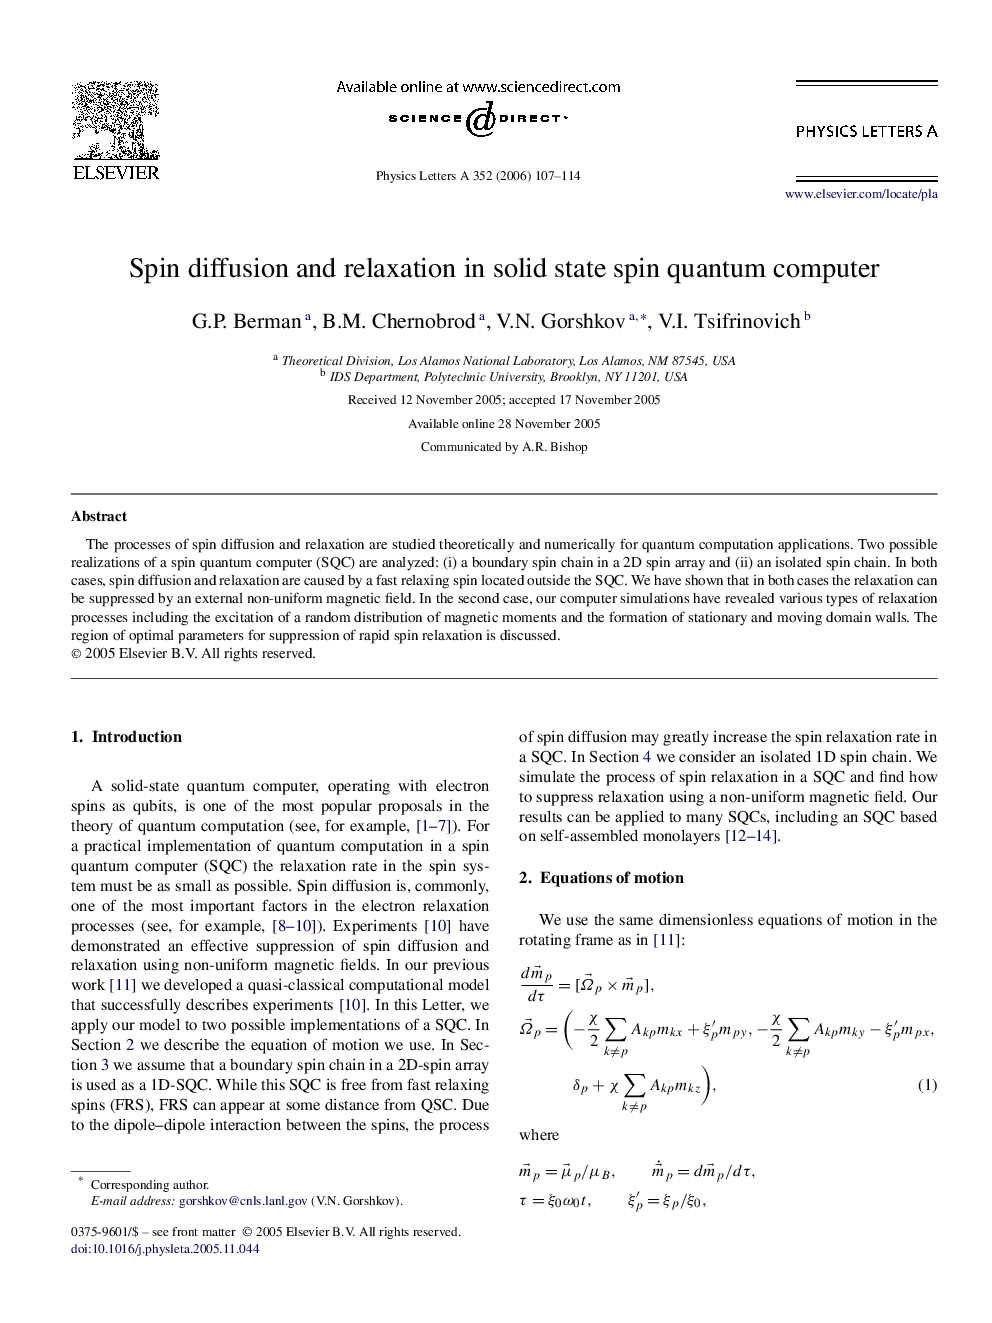 Spin diffusion and relaxation in solid state spin quantum computer